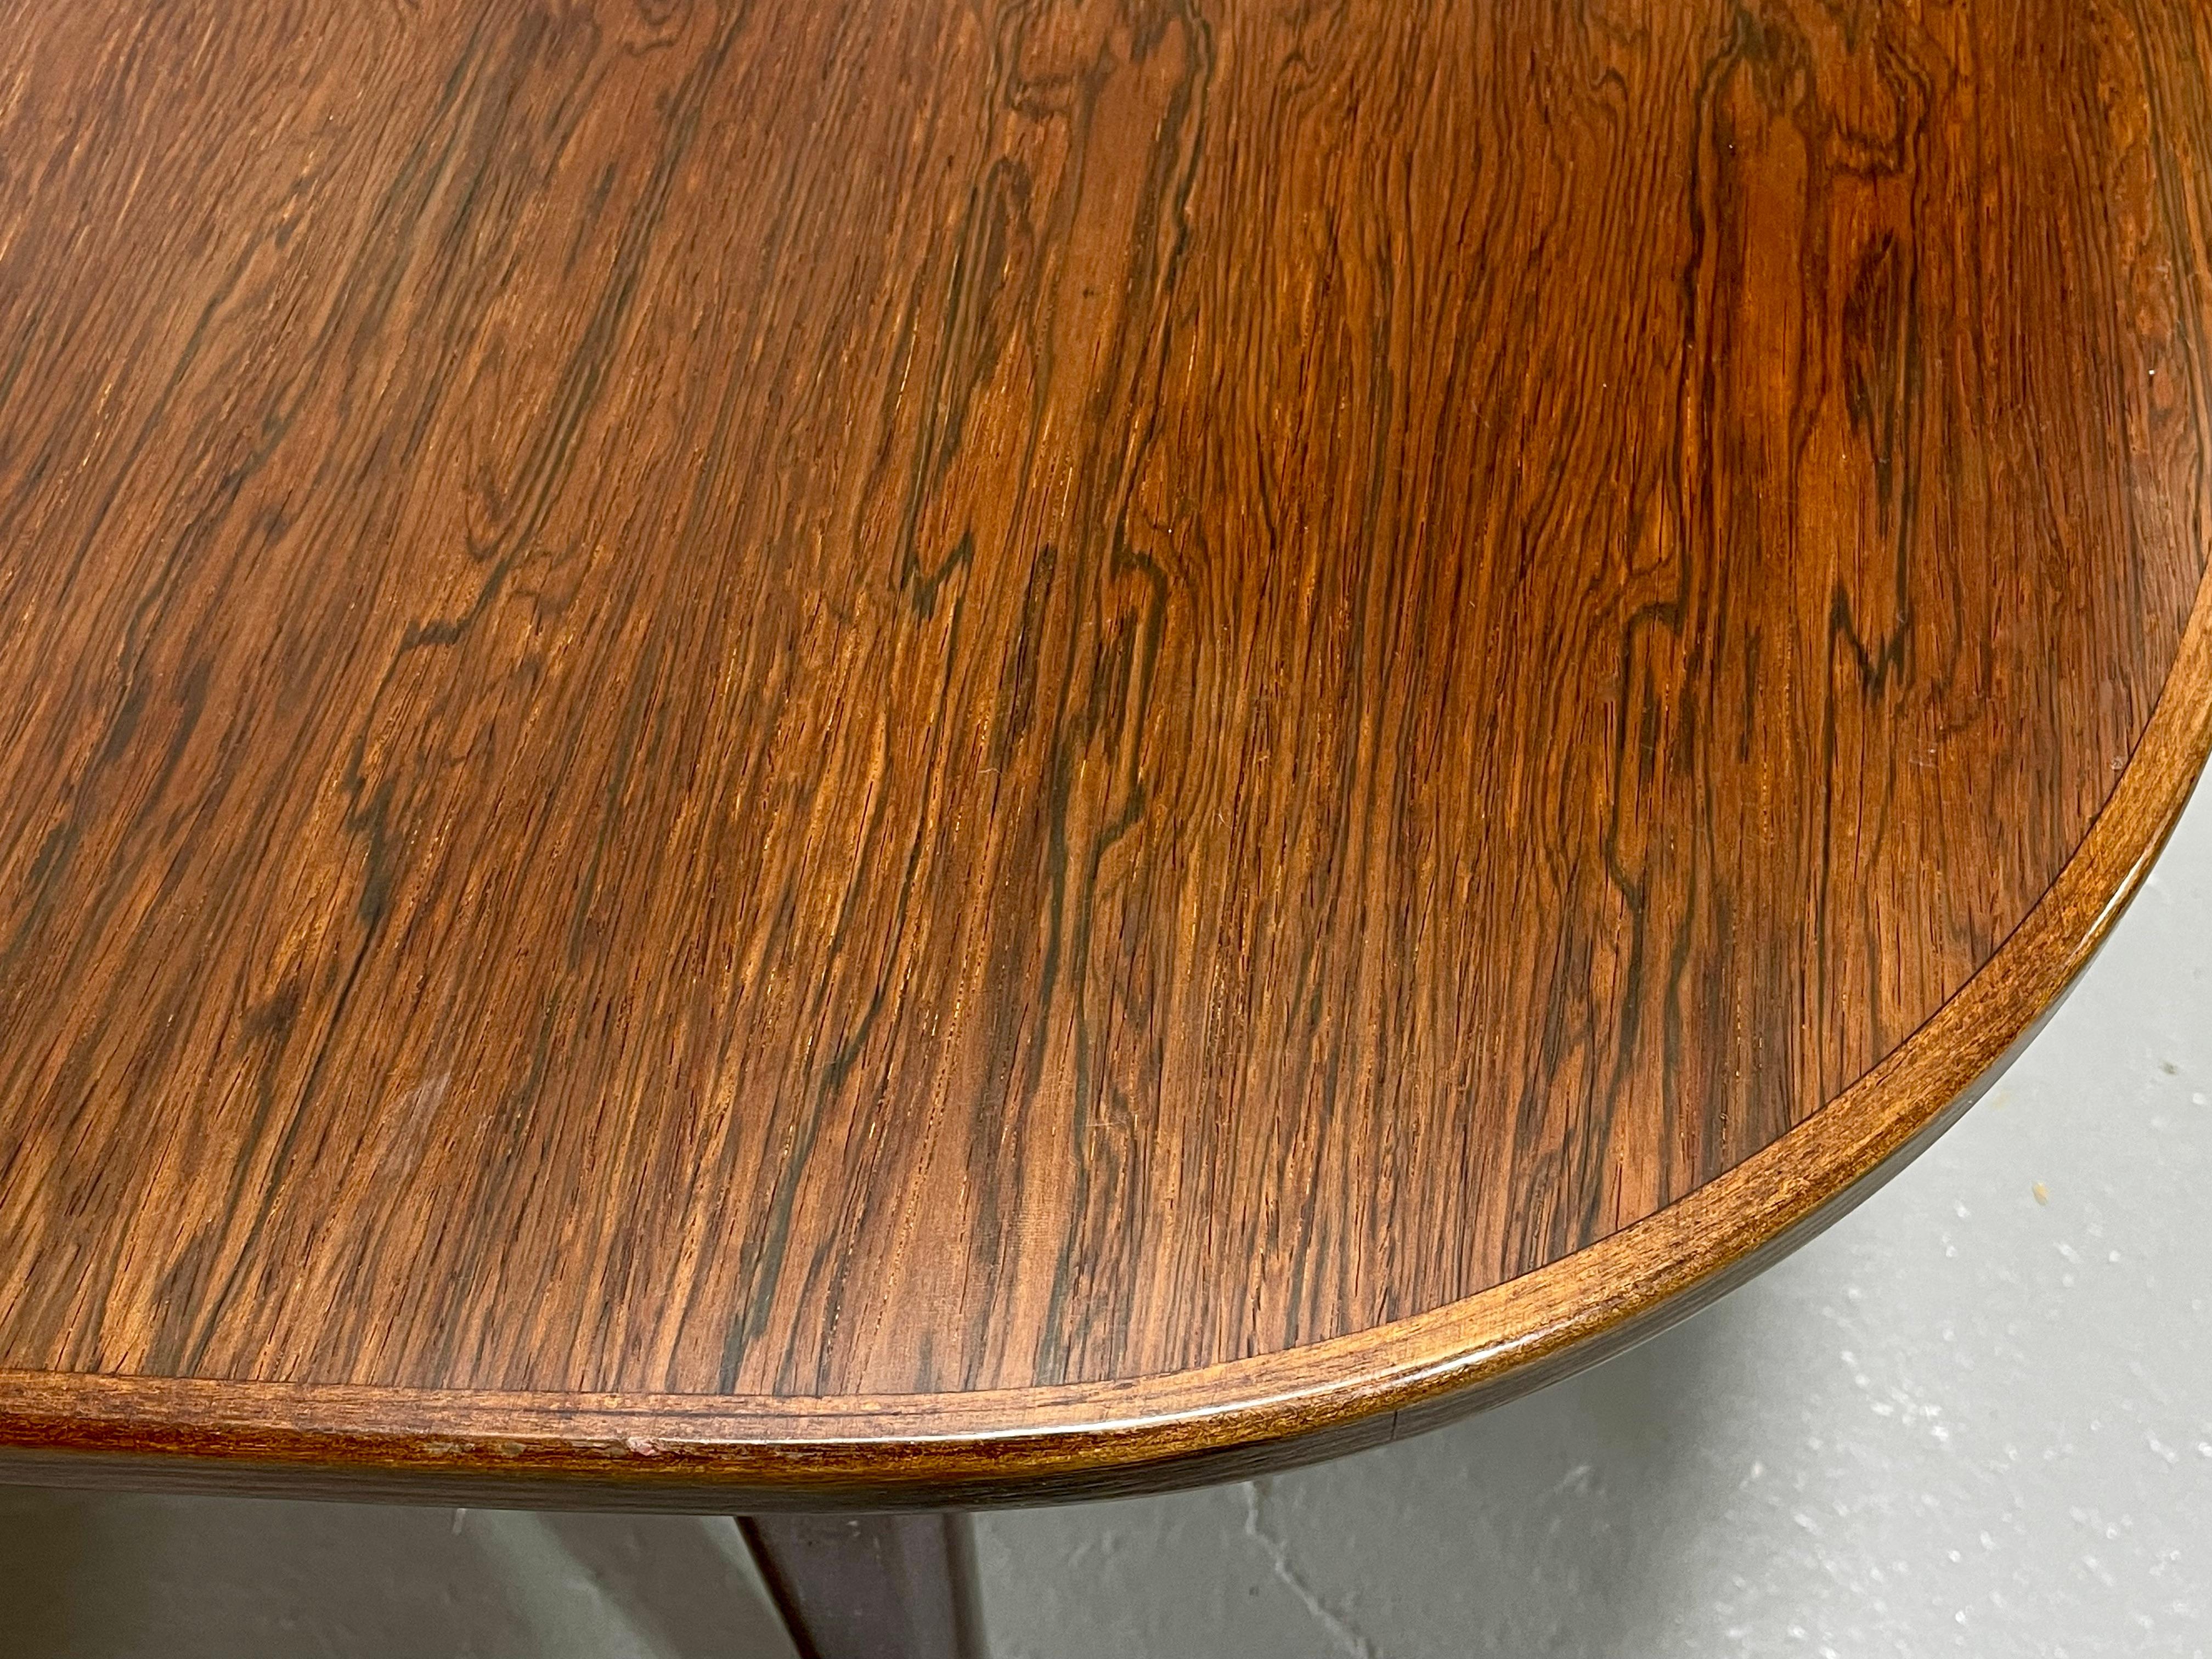 Extra LONG Mid Century Modern ROSEWOOD DINING Table, c. 1960’s For Sale 1